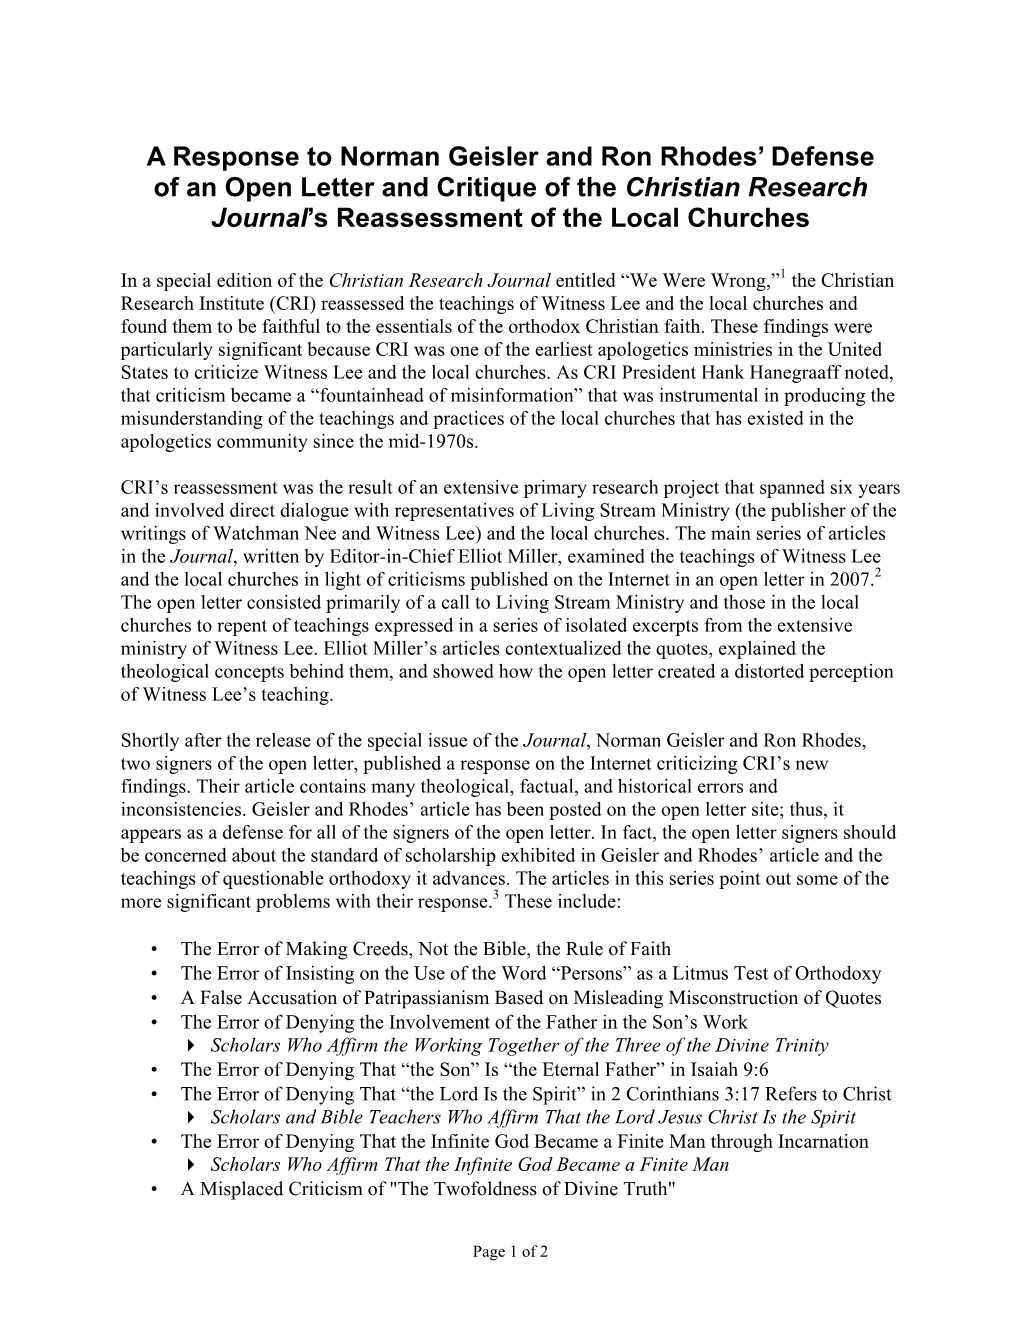 A Response to Norman Geisler and Ron Rhodes’ Defense of an Open Letter and Critique of the Christian Research Journal’S Reassessment of the Local Churches